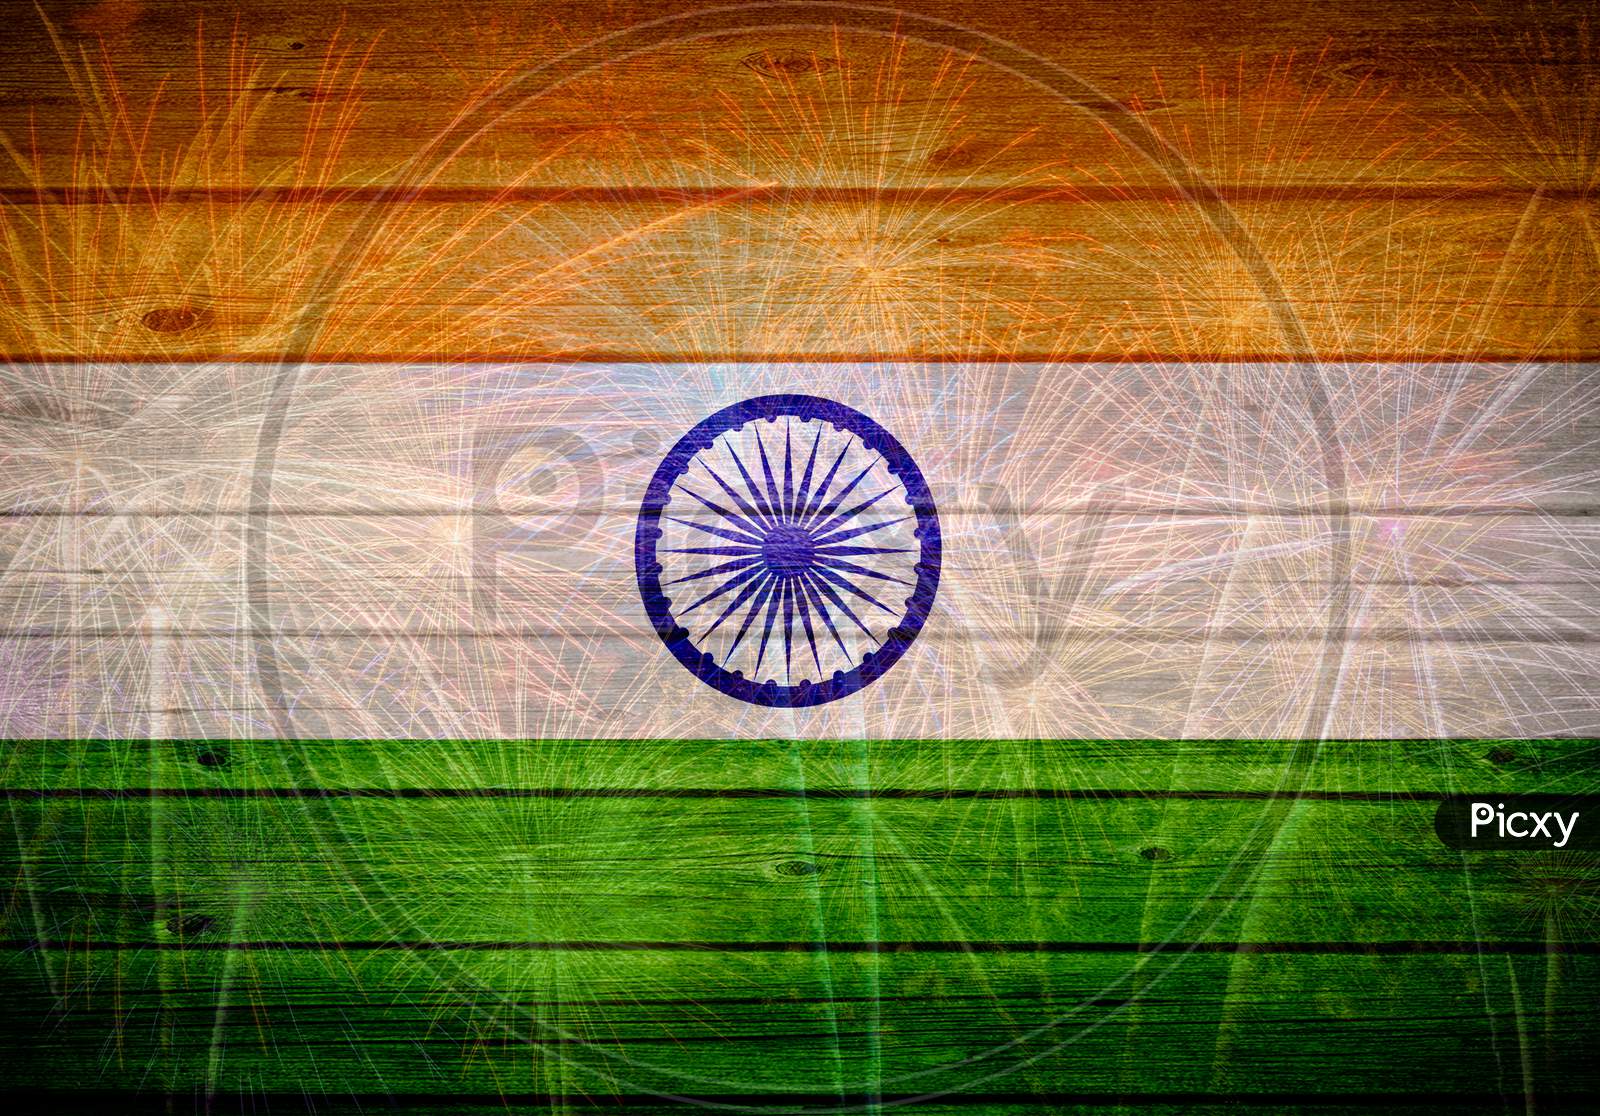 Indian flag painted on wooden texture with fireworks background